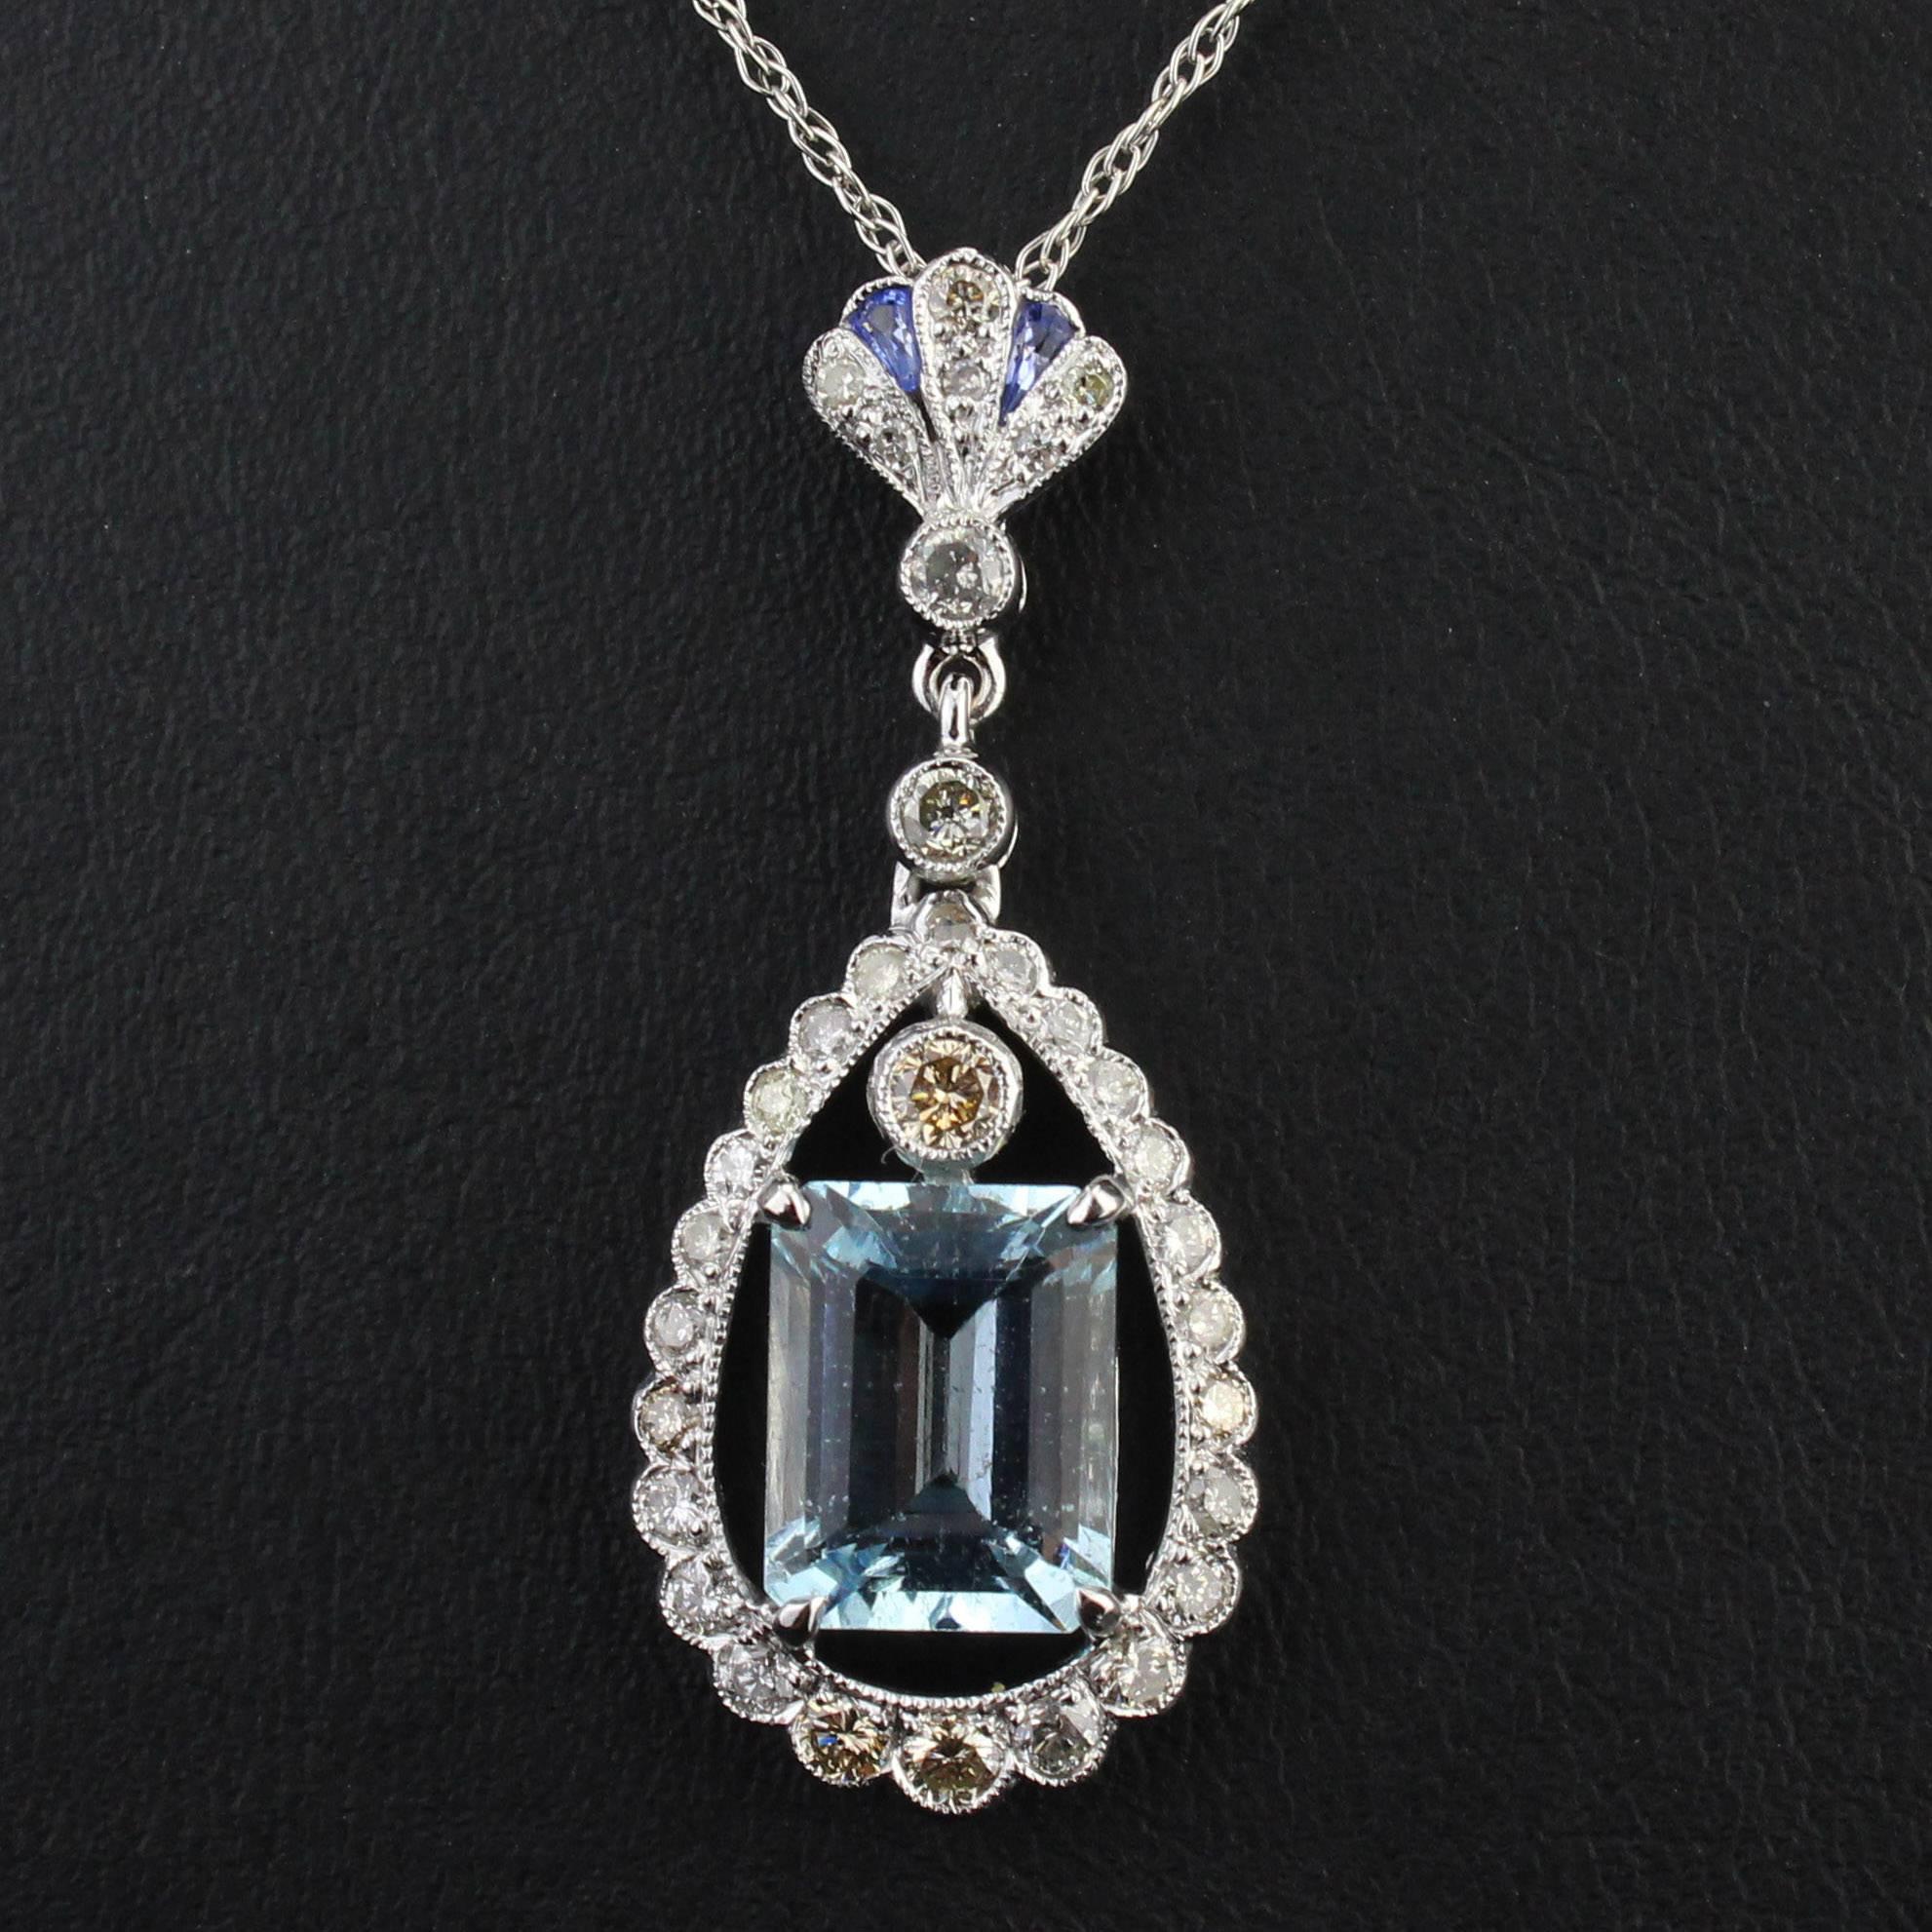 Necklace, circa 1960/70
With aquamarine and diamonds
Measures: Height 3.2 cm, width 1.5 cm, depth 0.2 cm, chain length ca. 45 cm

Delivery can be made to your door within 7 days worldwide. We already delivered to Asia, US and a lot of European